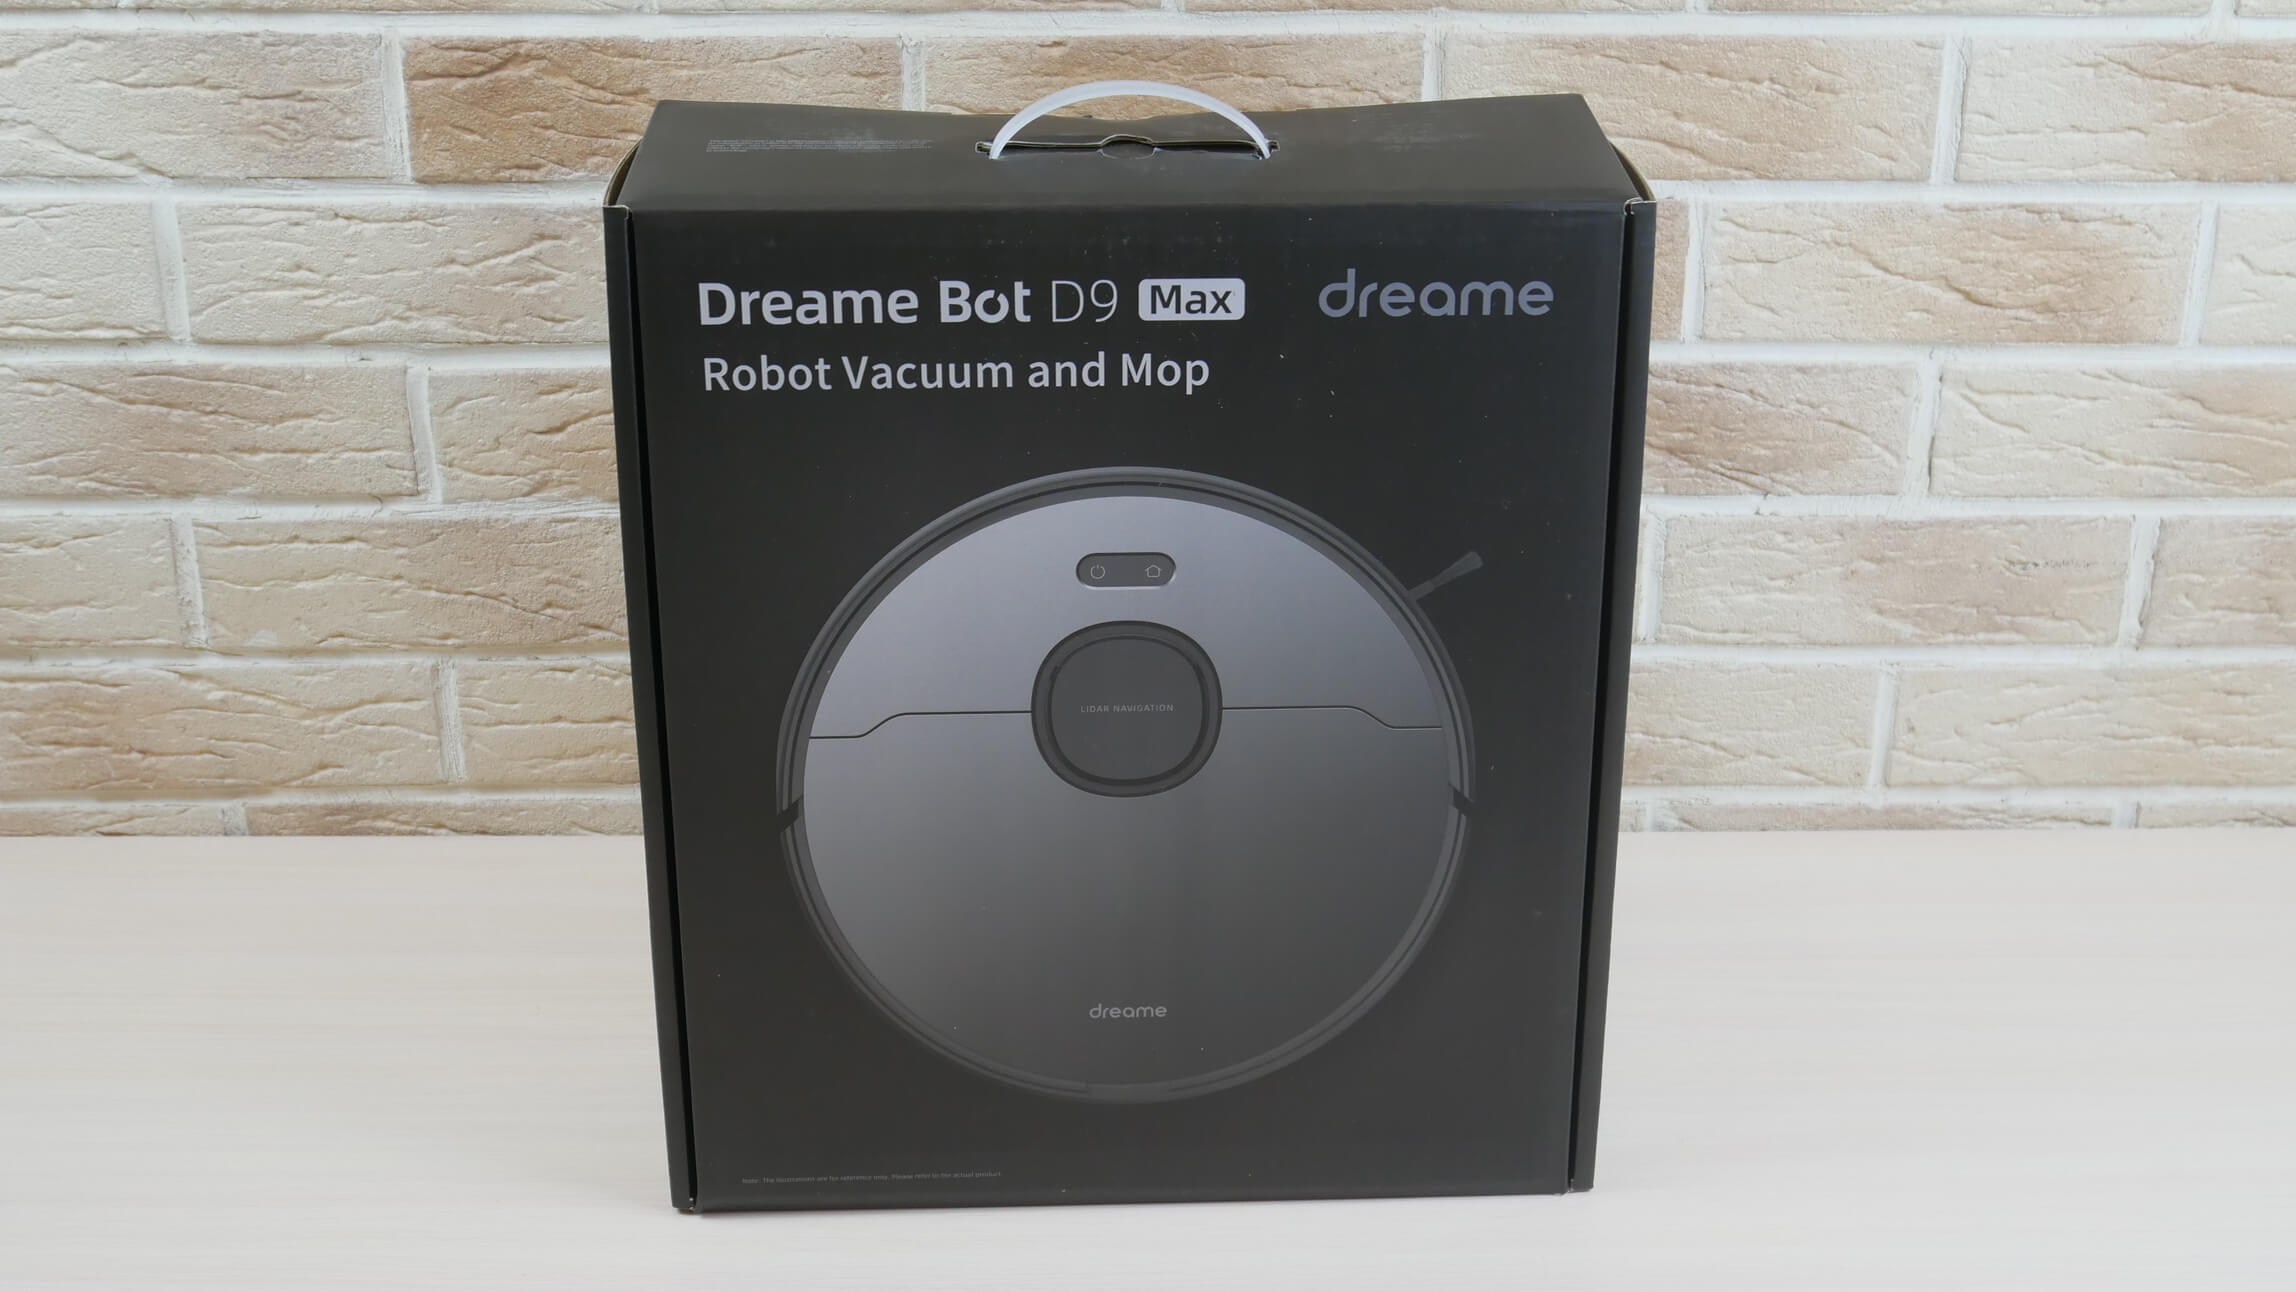 Dreame Bot D9 Max: review, test and comparison with the Dreame D9